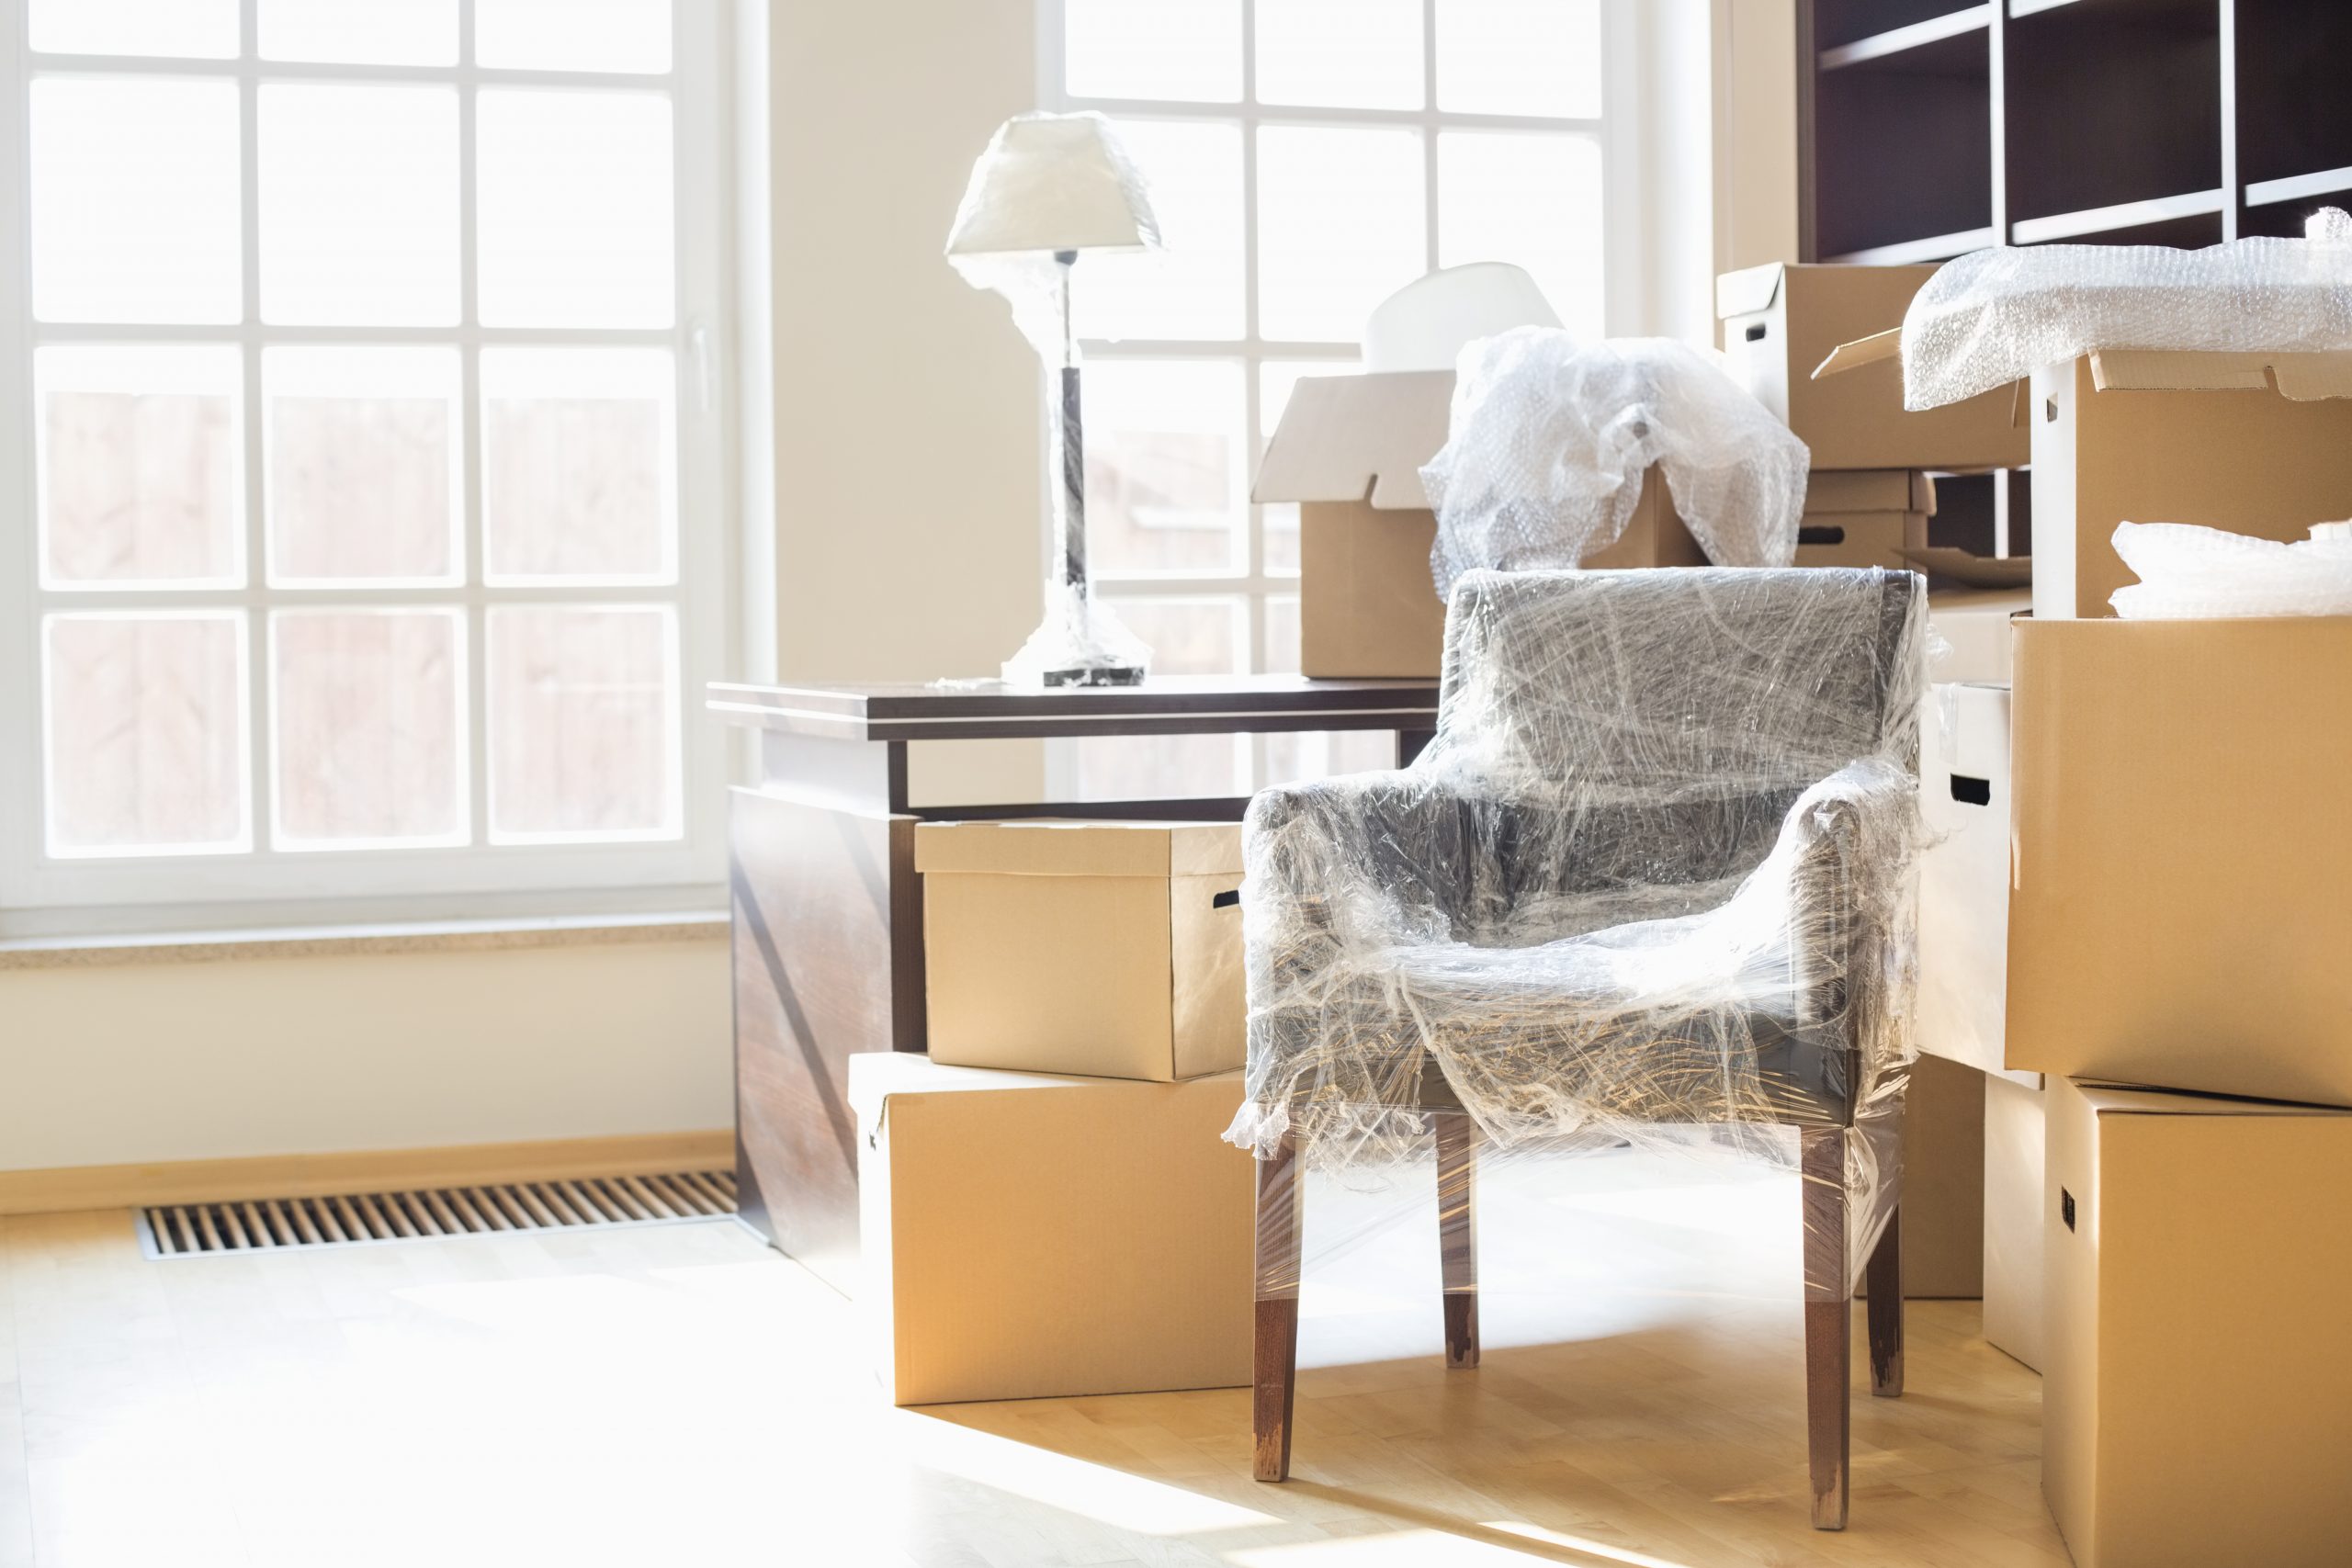 How To Disassemble Your House To Prepare For A Short Distance Move